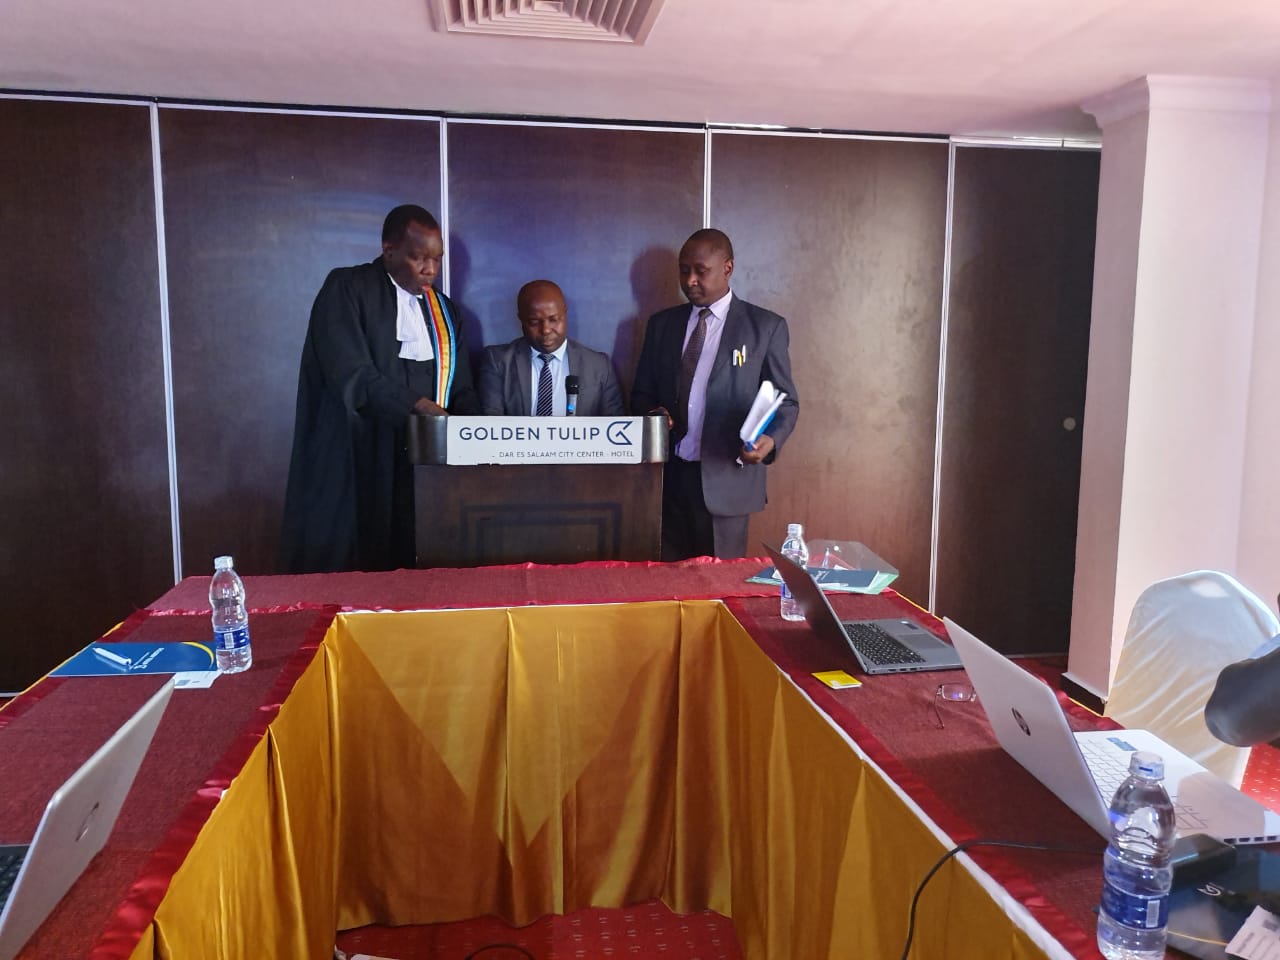 The Counsel to the Community, Dr. Anthony Kafumbe (on the right), the Registrar of the East African Court of Justice, Mr. Yufnalis N. Okubo (on the left) and Dr. John K. Mduma (centre) at the swearing in ceremony. 